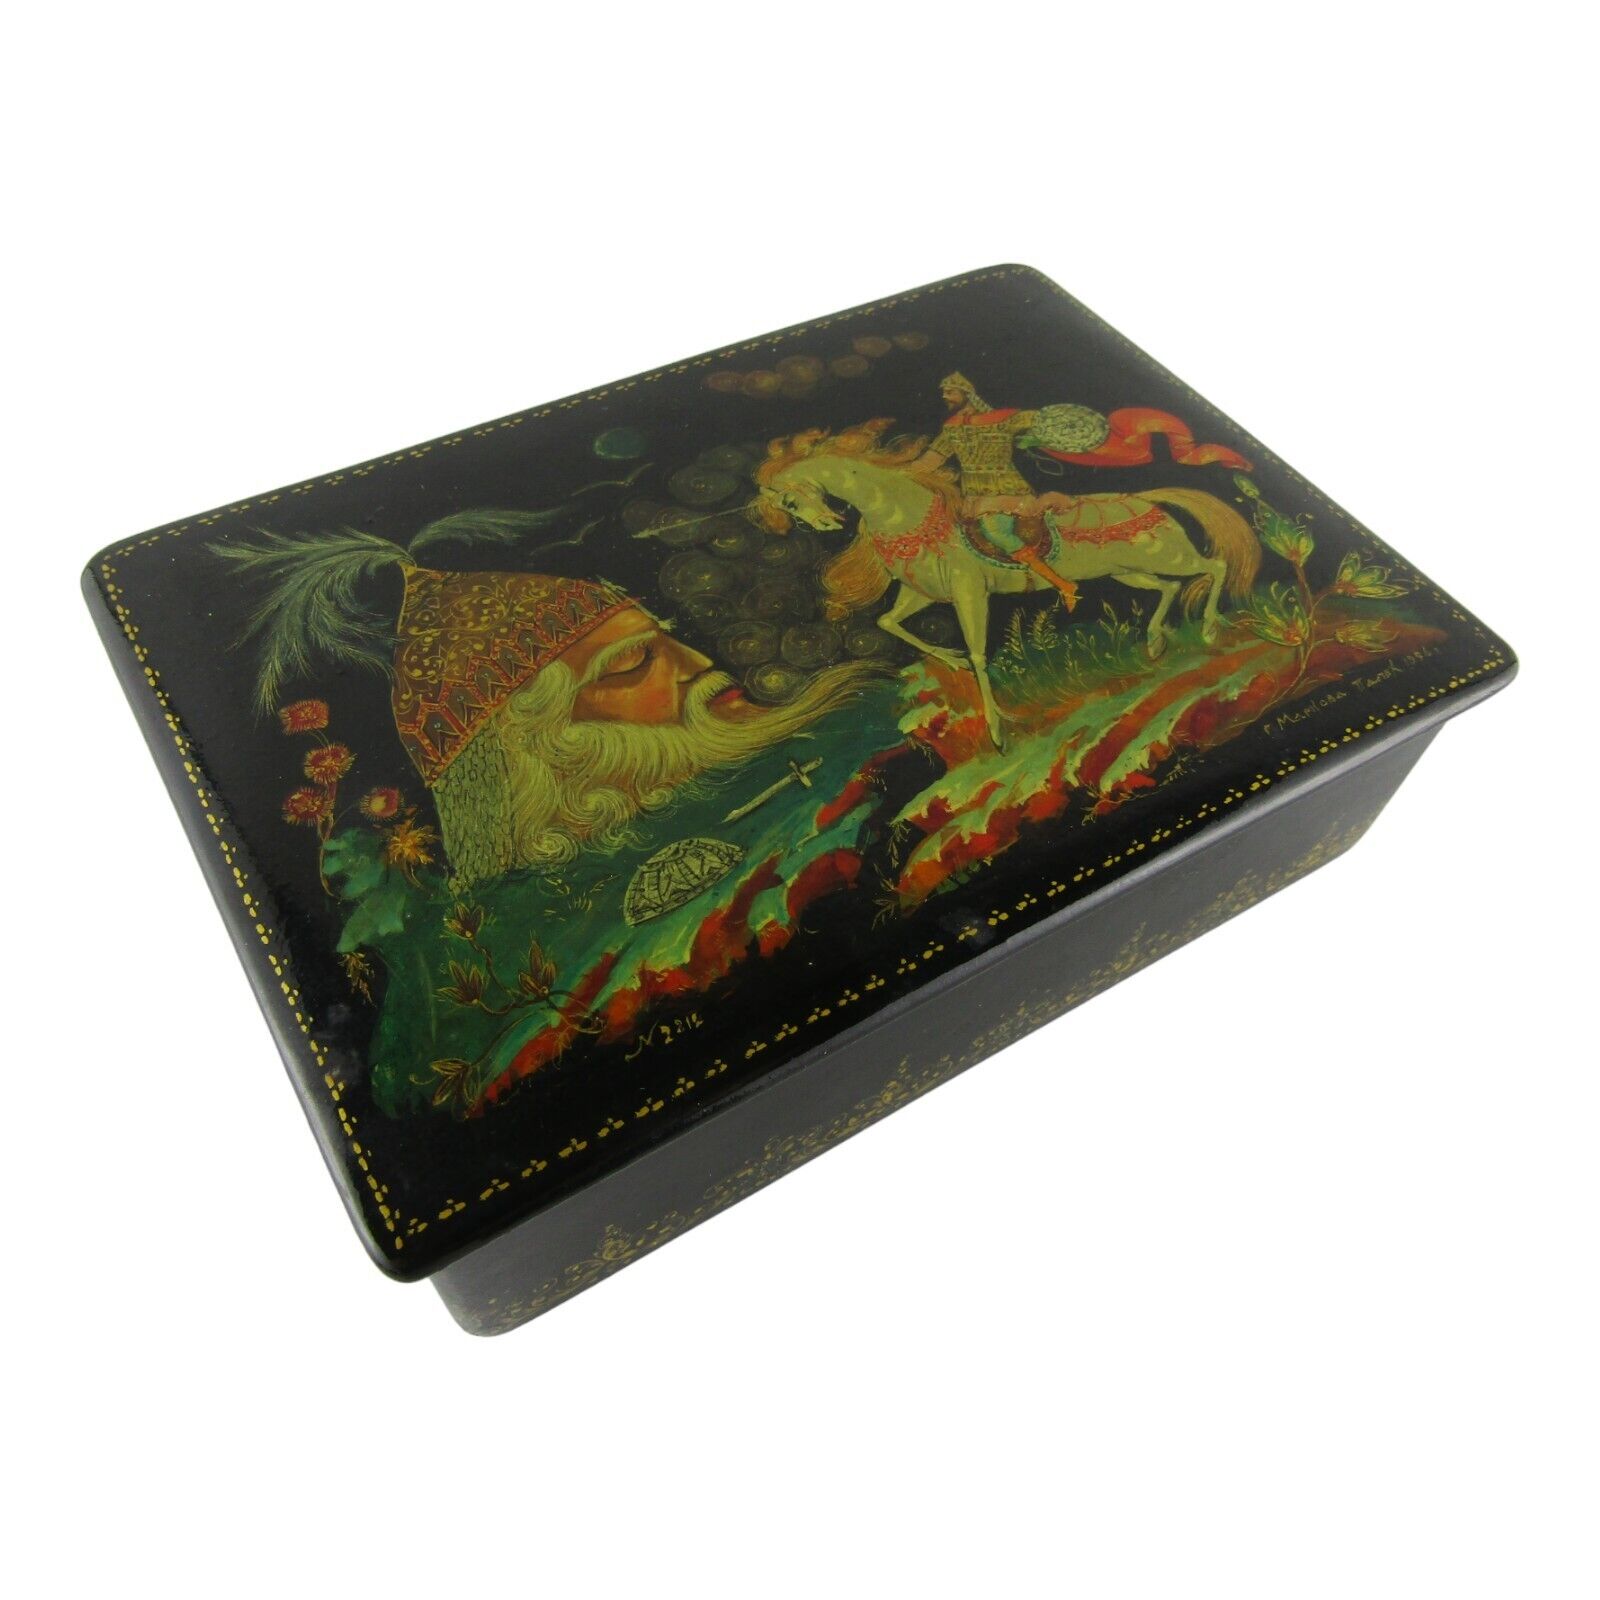 Vintage Russian Markova Palekh Signed Lacquer Box USSR 1962 6 Inch